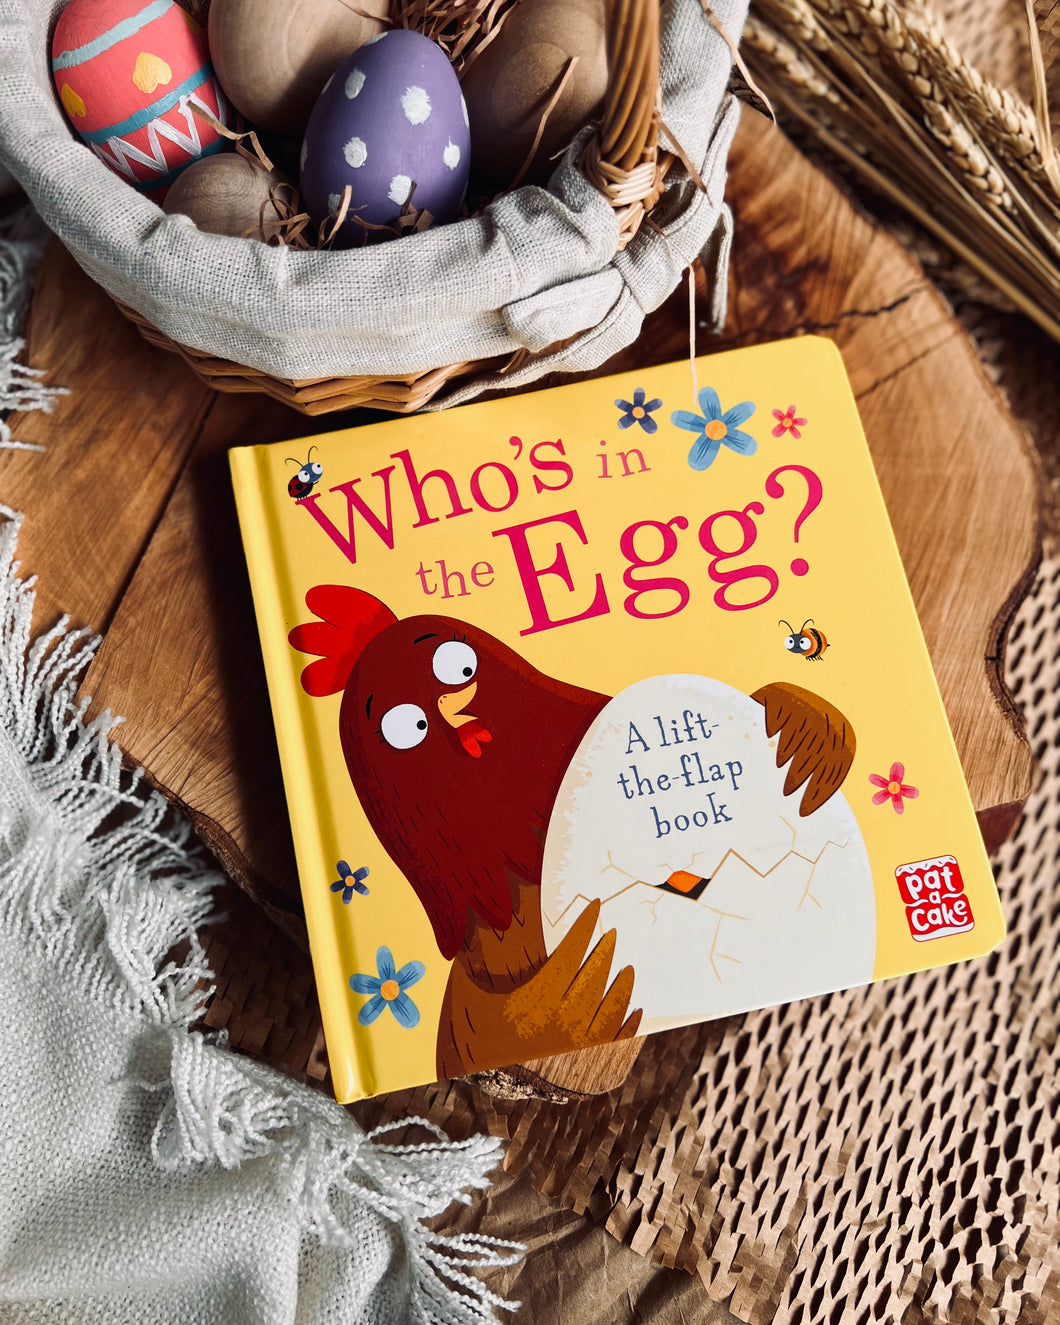 Who's In Egg? (Lift-the-flap book)